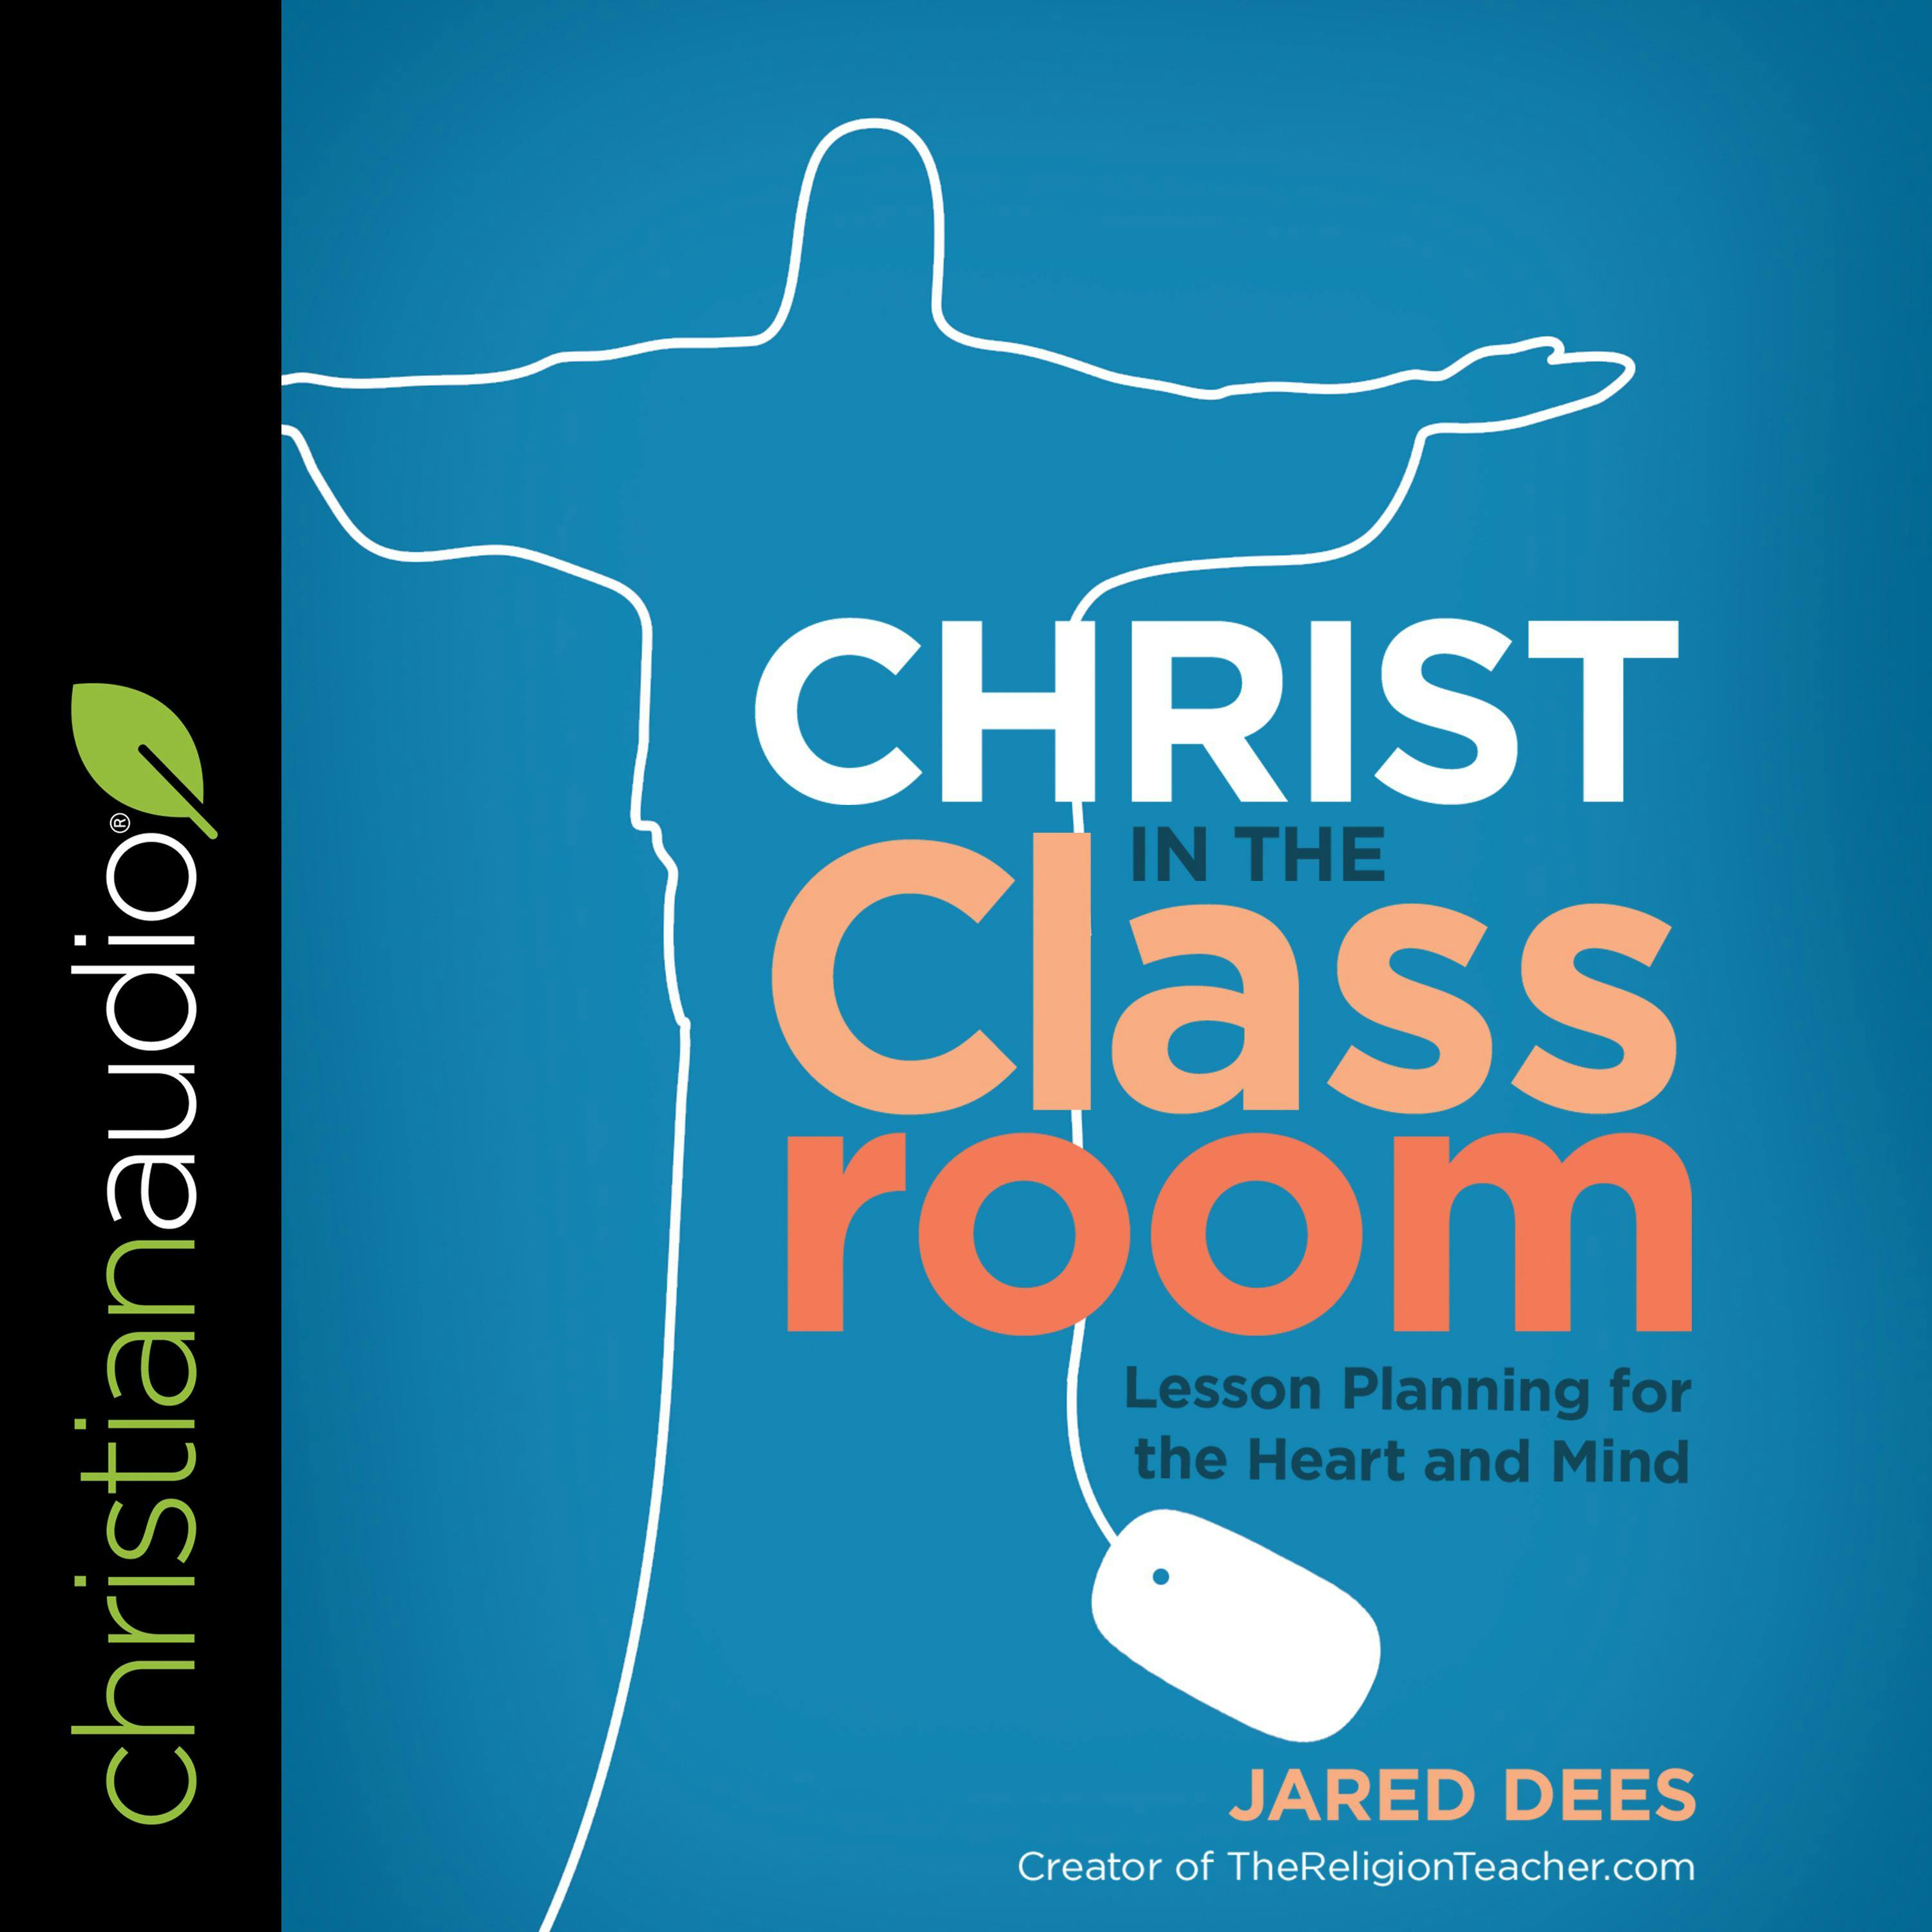 Christ in the Classroom: Lesson Planning for the Heart and Mind - Jared Dees